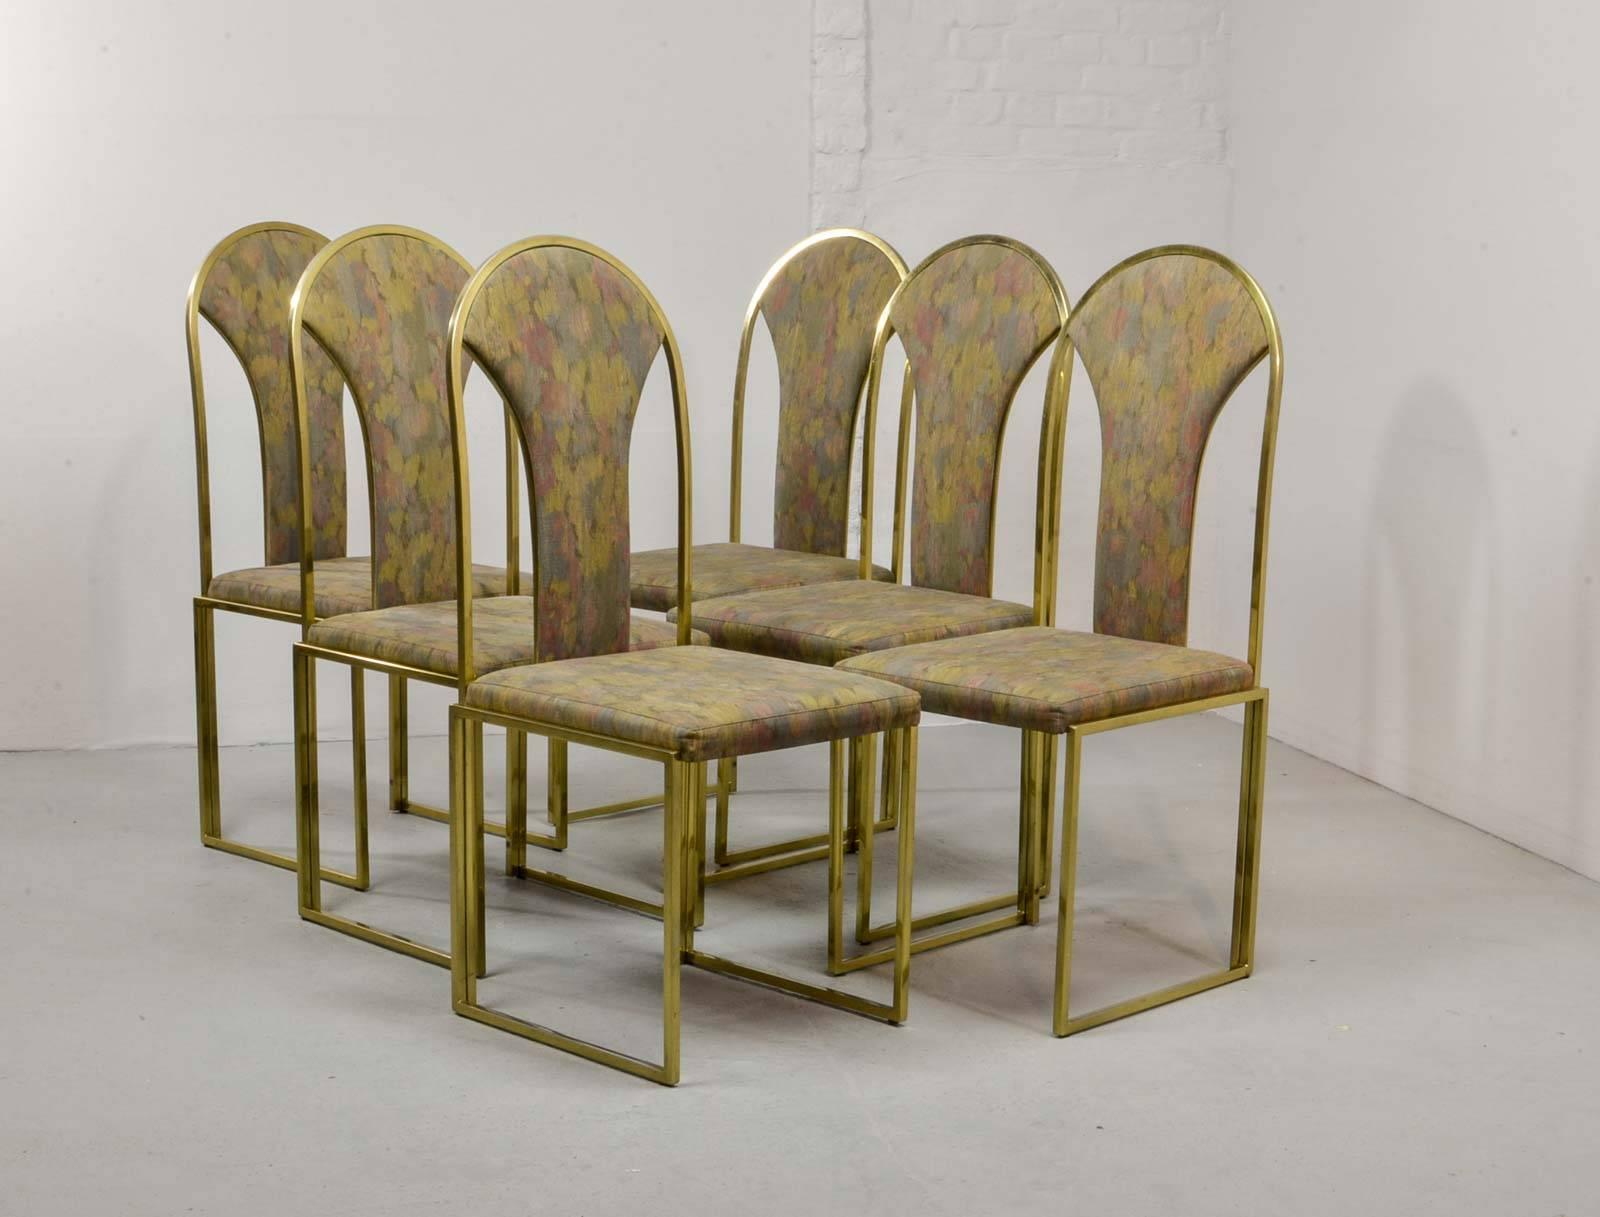 Nice set of six luxurious dining chairs produced by Belgo Chrome in the 1970s. The chairs are upholstered with a distinguished multicolored fabric and fit perfectly in a Hollywood Regency oriented interior. The gold plated frames show some patina.